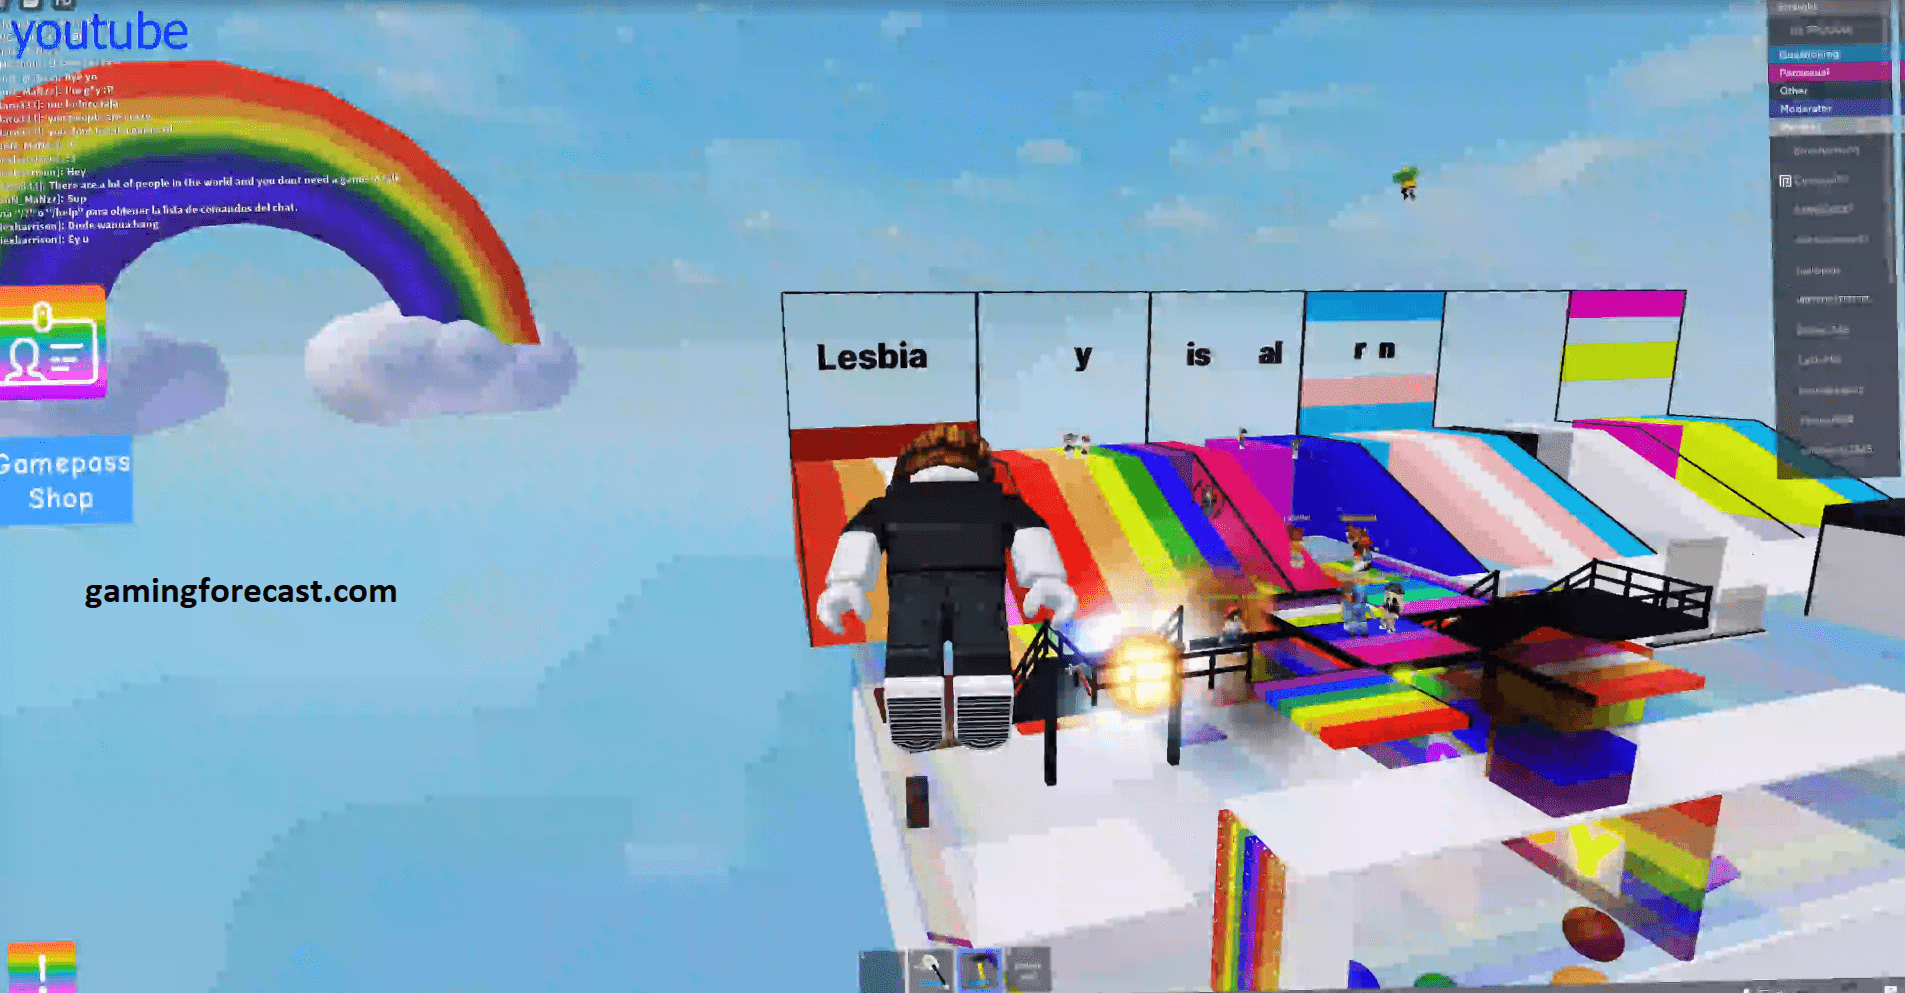 Roblox Hack Download Pc Destroy Lobby Fly Aimbot Scripts 2021 Gaming Forecast Download Free Online Game Hacks - how to make a only admin fly script roblox